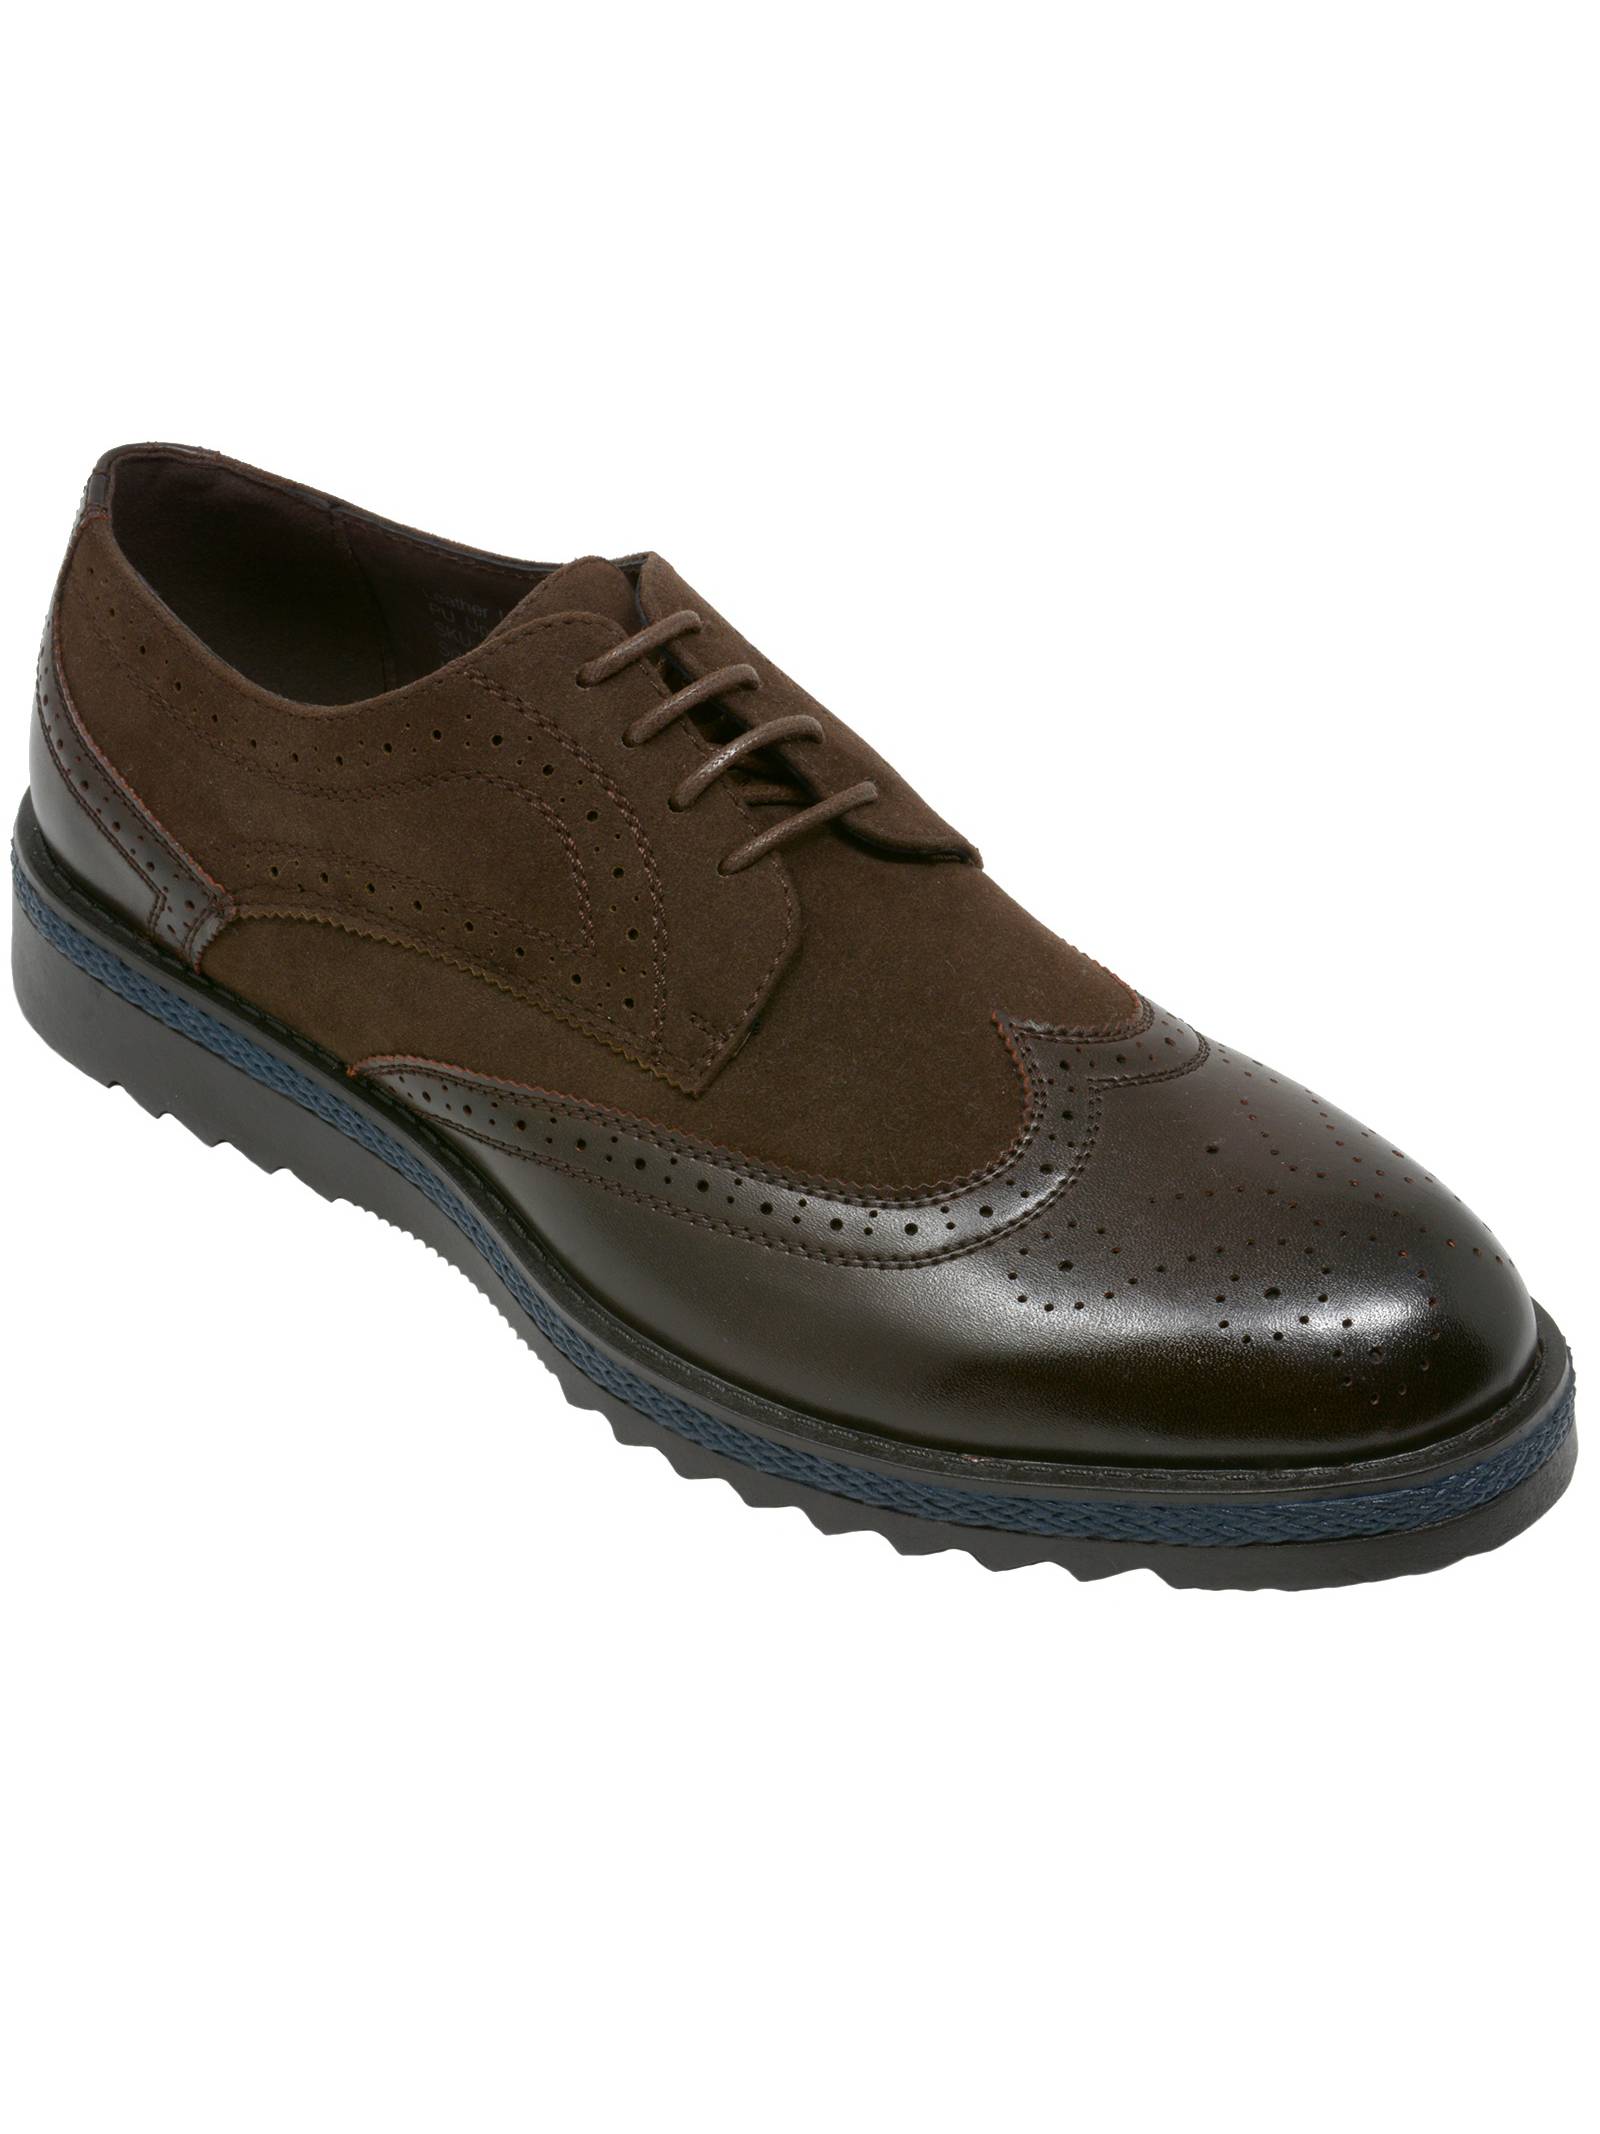 Alpine Swiss Alec Mens Wingtip Shoes 1.5” Ripple Sole Leather Insole & Lining - image 3 of 6